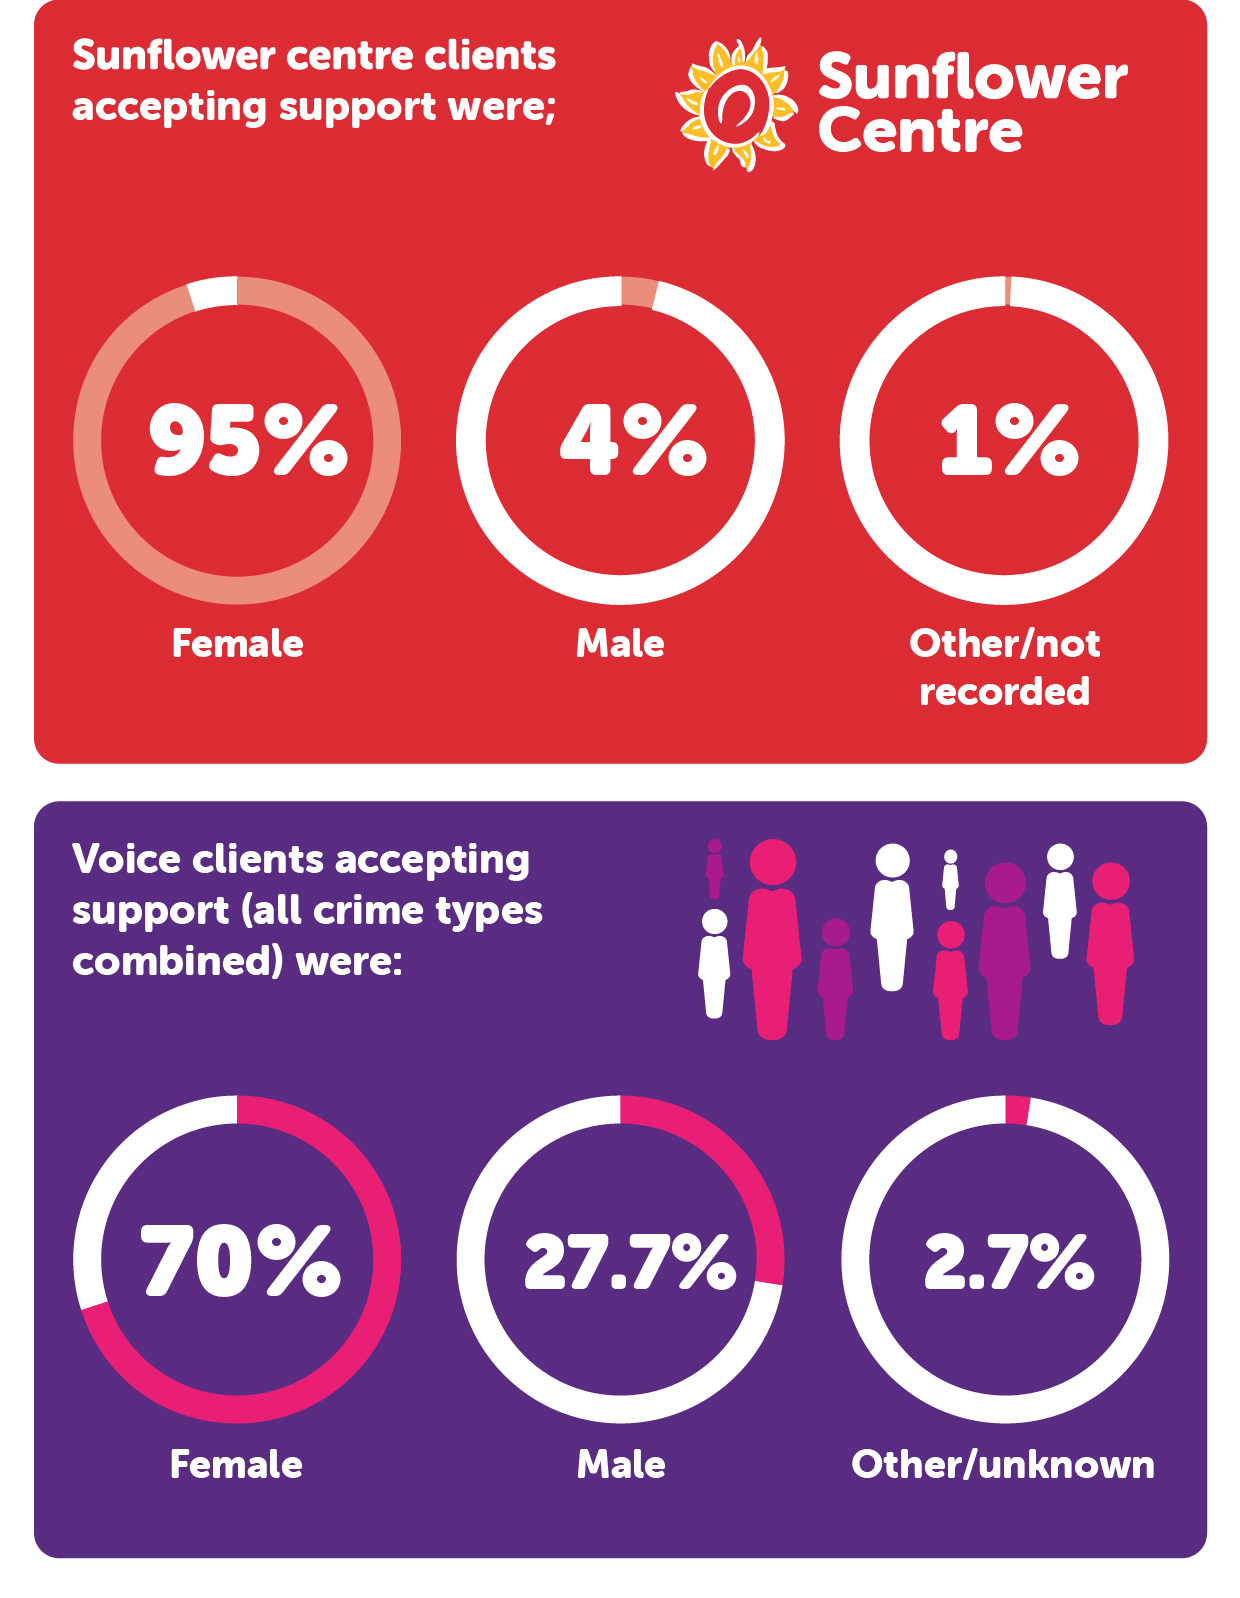 Sunflower centre clients accepting support were; 95% female 4% male 1% other/not recorded Voice clients accepting support (all crime types combined) were: 70% female 27.7% male 2.7% other/unknown